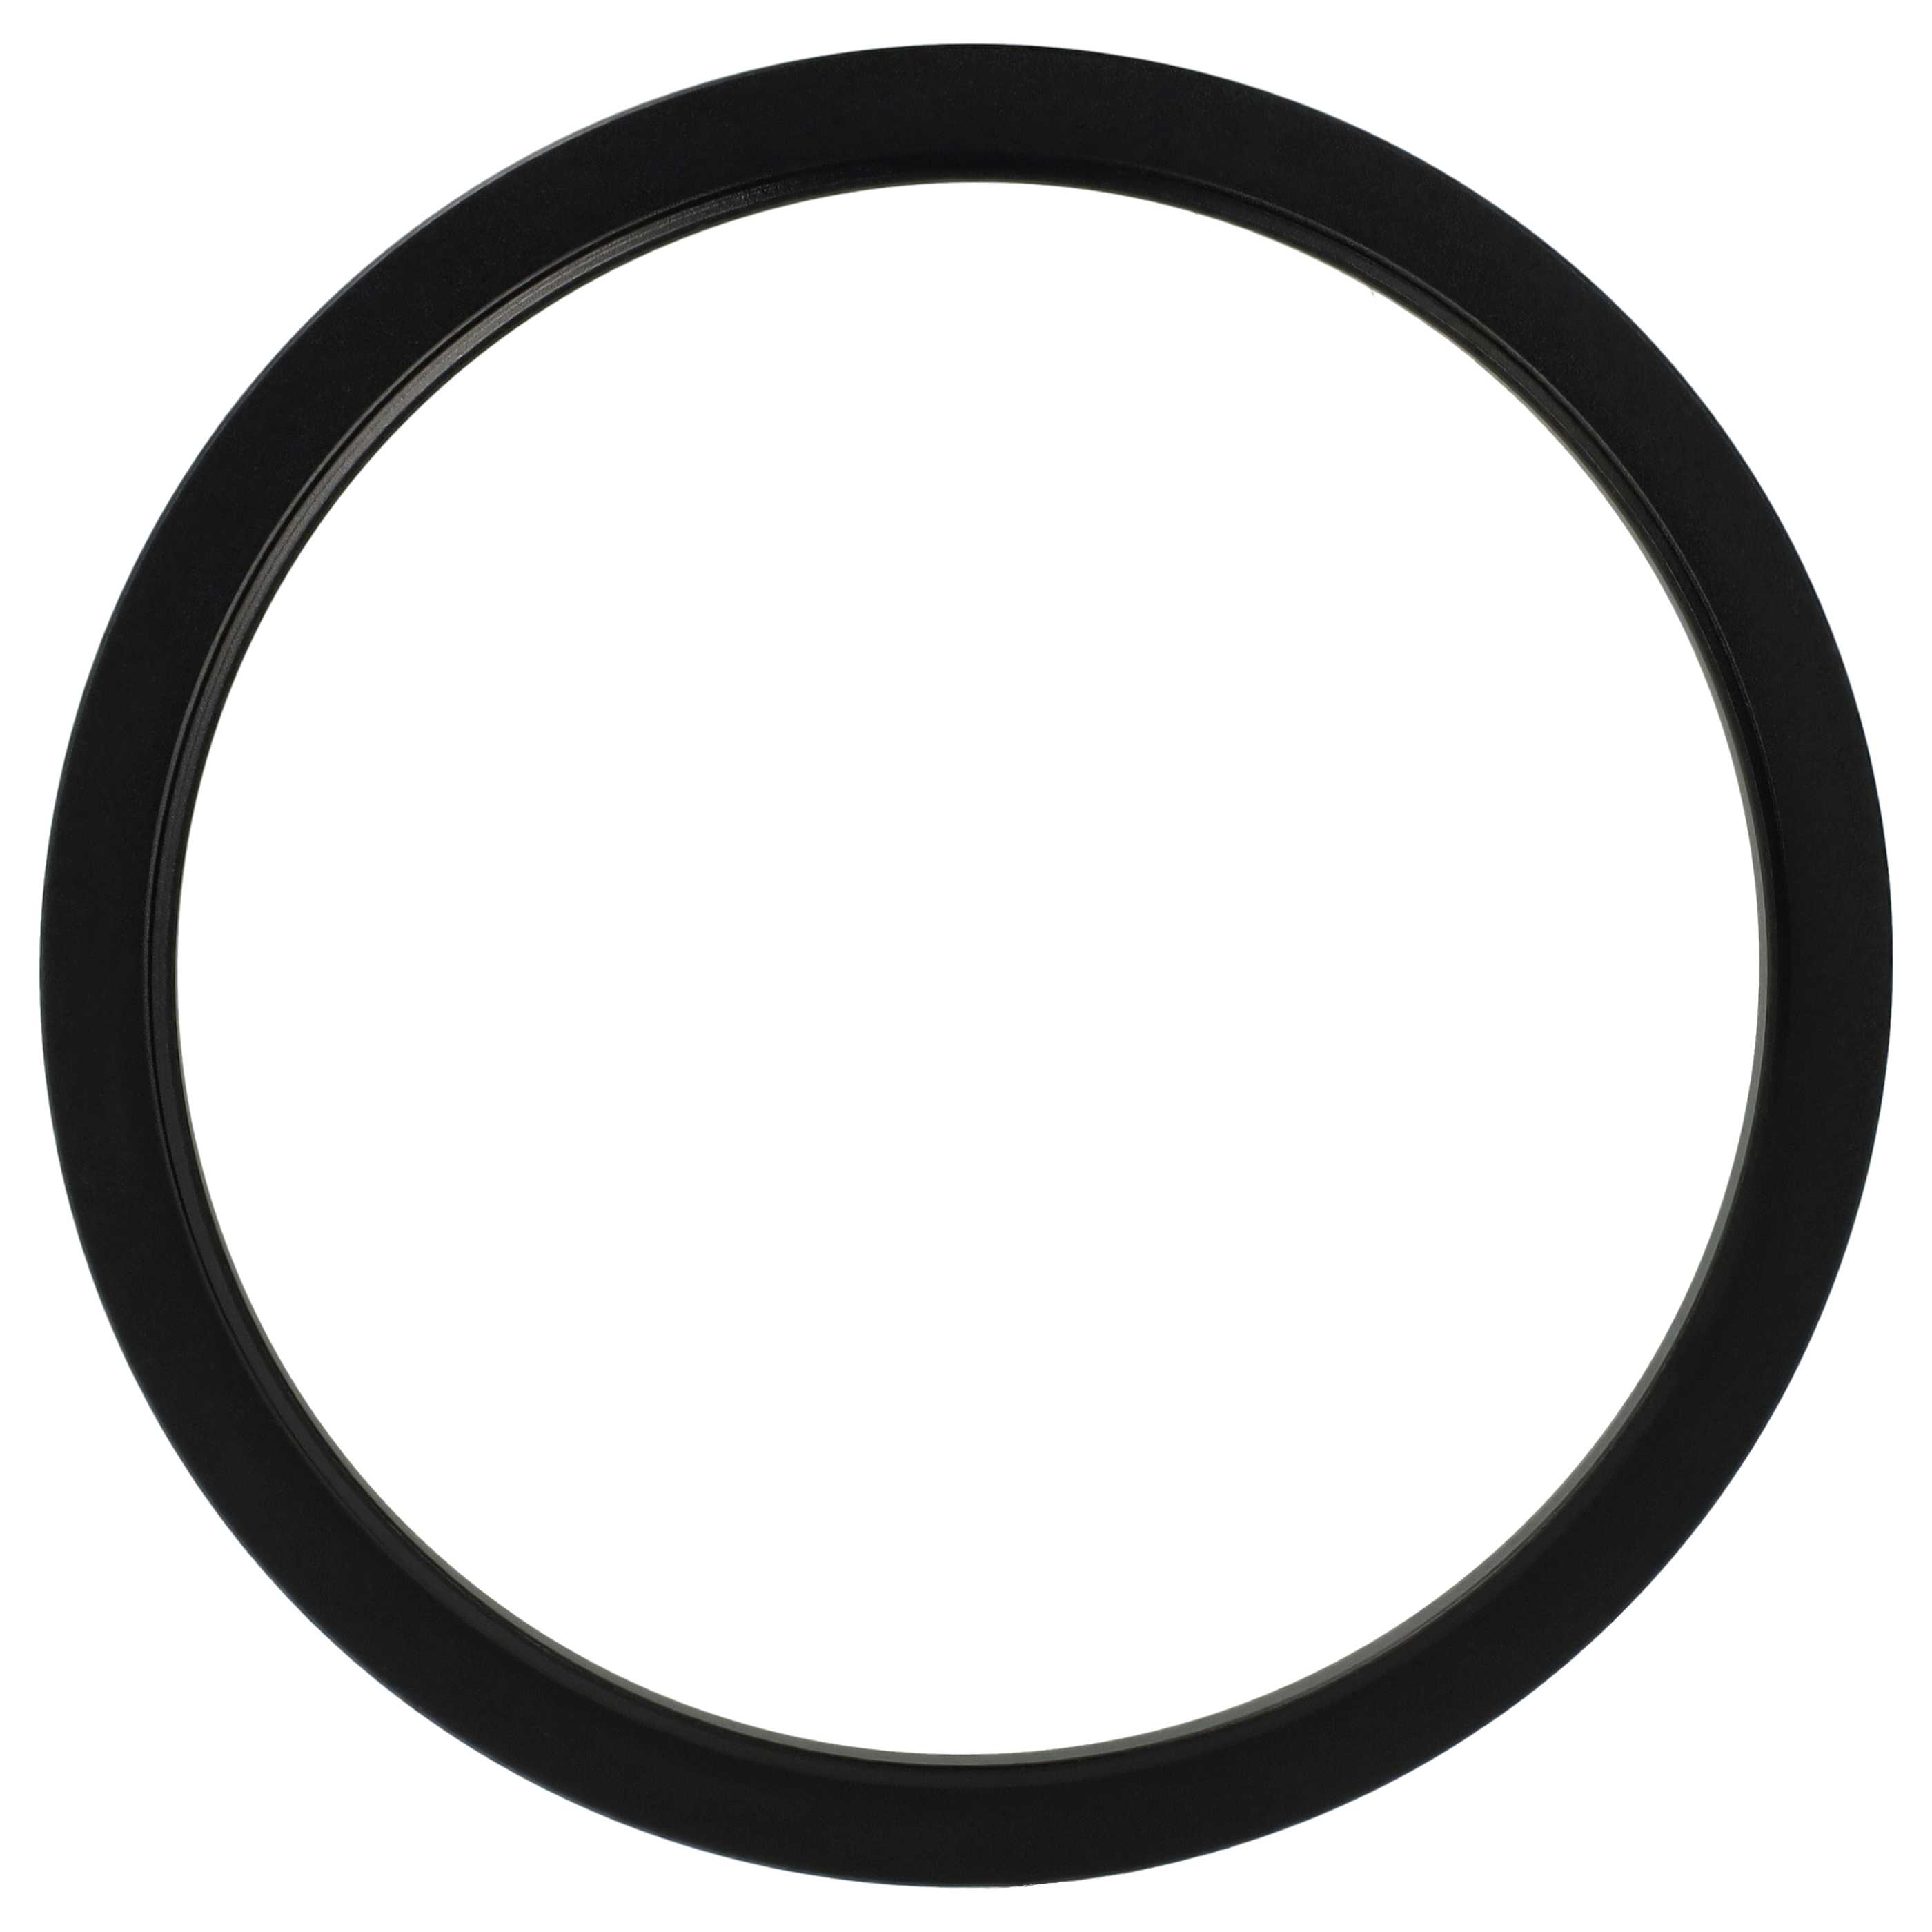 Step-Up Ring Adapter of 86 mm to 95 mmfor various Camera Lens - Filter Adapter